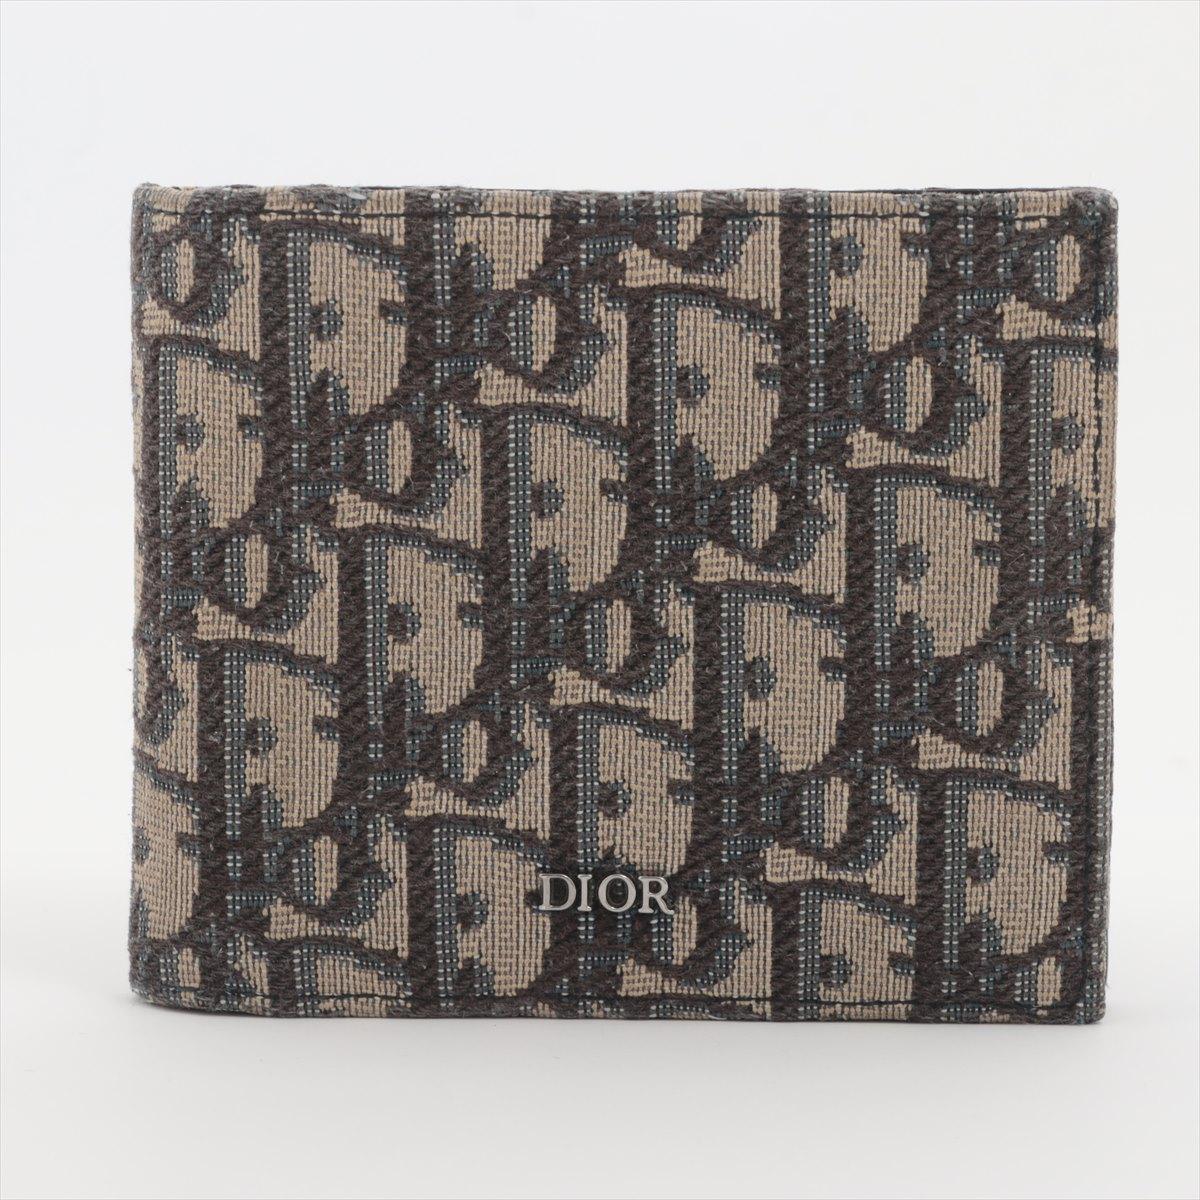 The Dior Oblique Canvas Leather Bi-fold Wallet in Navy Blue is a sophisticated and timeless accessory that showcases Dior's iconic design elements. Crafted from durable canvas and adorned with the signature Oblique monogram pattern, the wallet